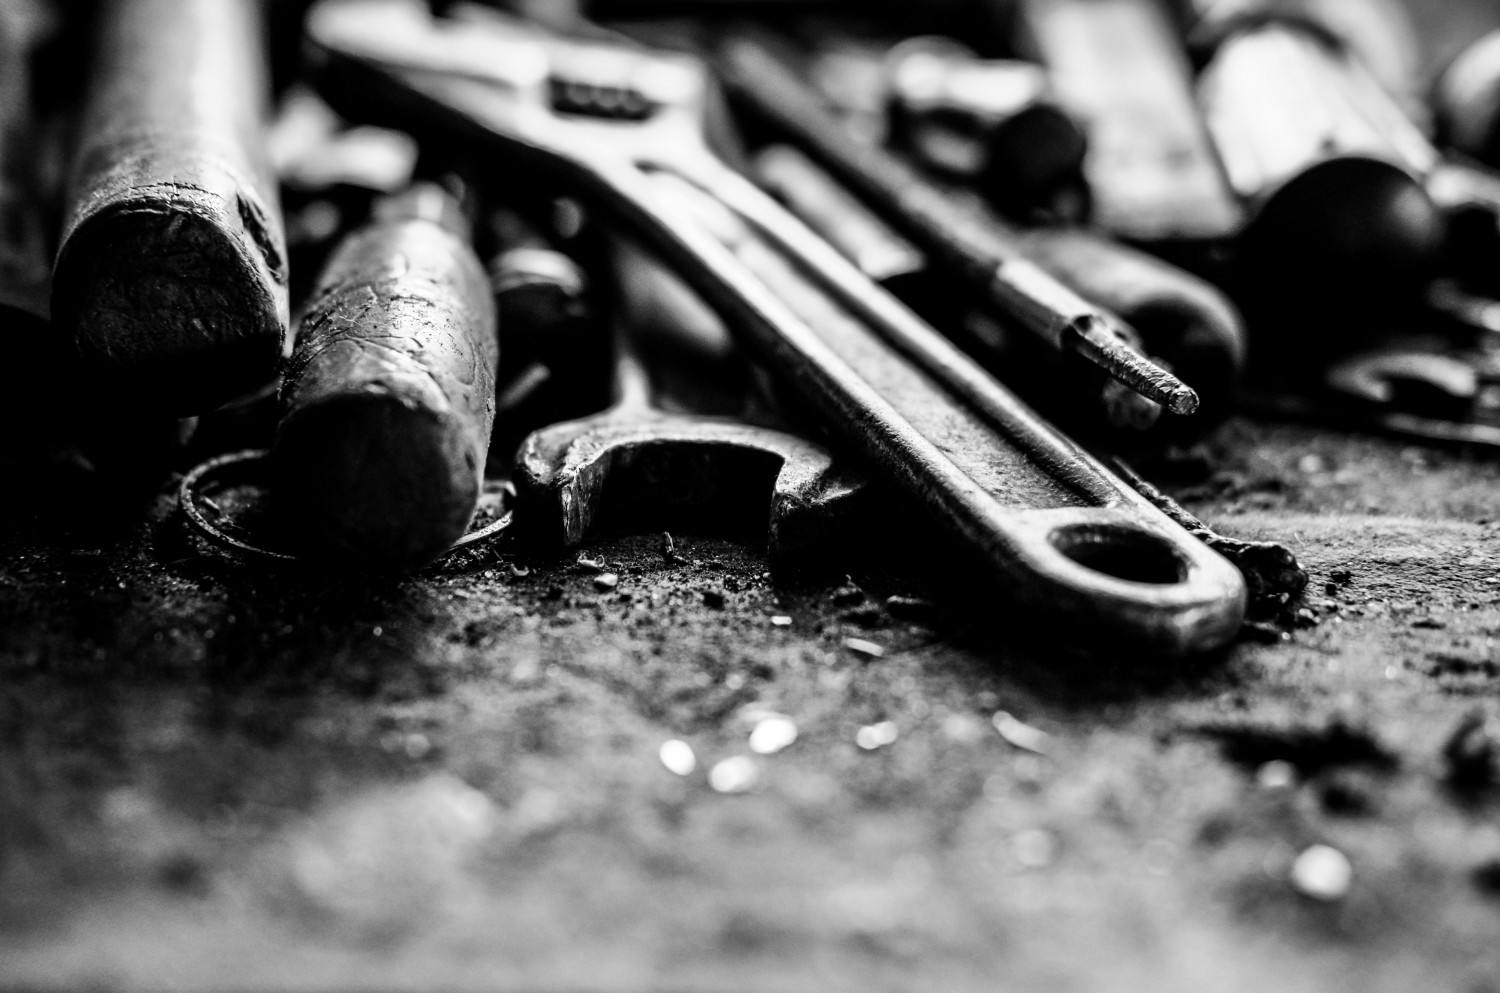 Image of a tools on a work bench